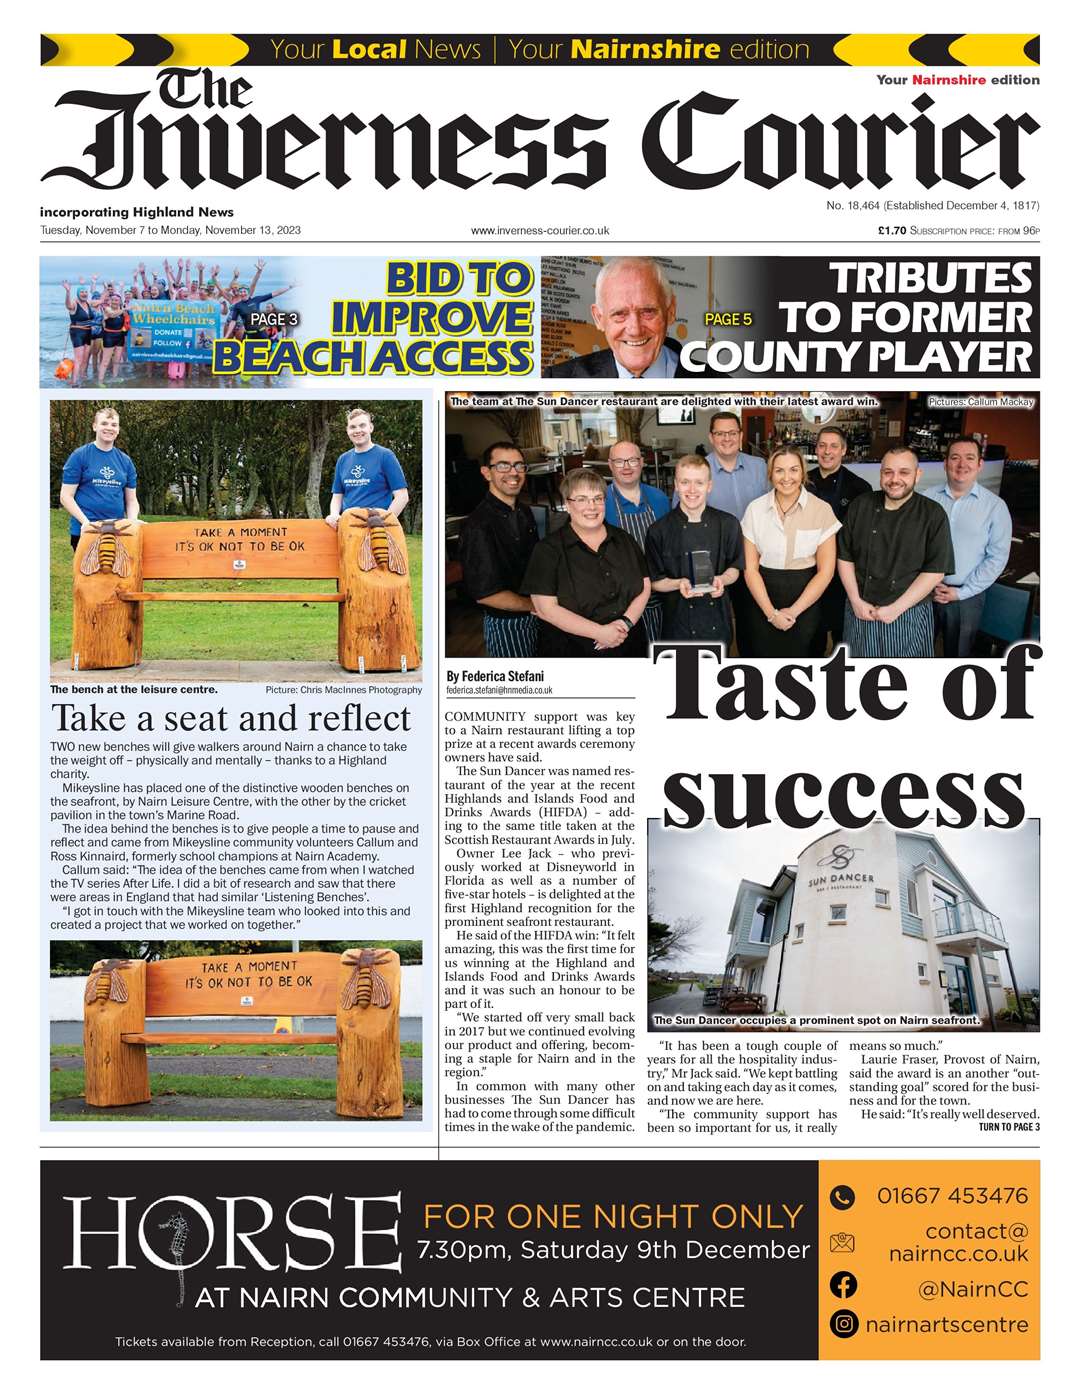 The Inverness Courier (Nairnshire edition), November 7, front page.